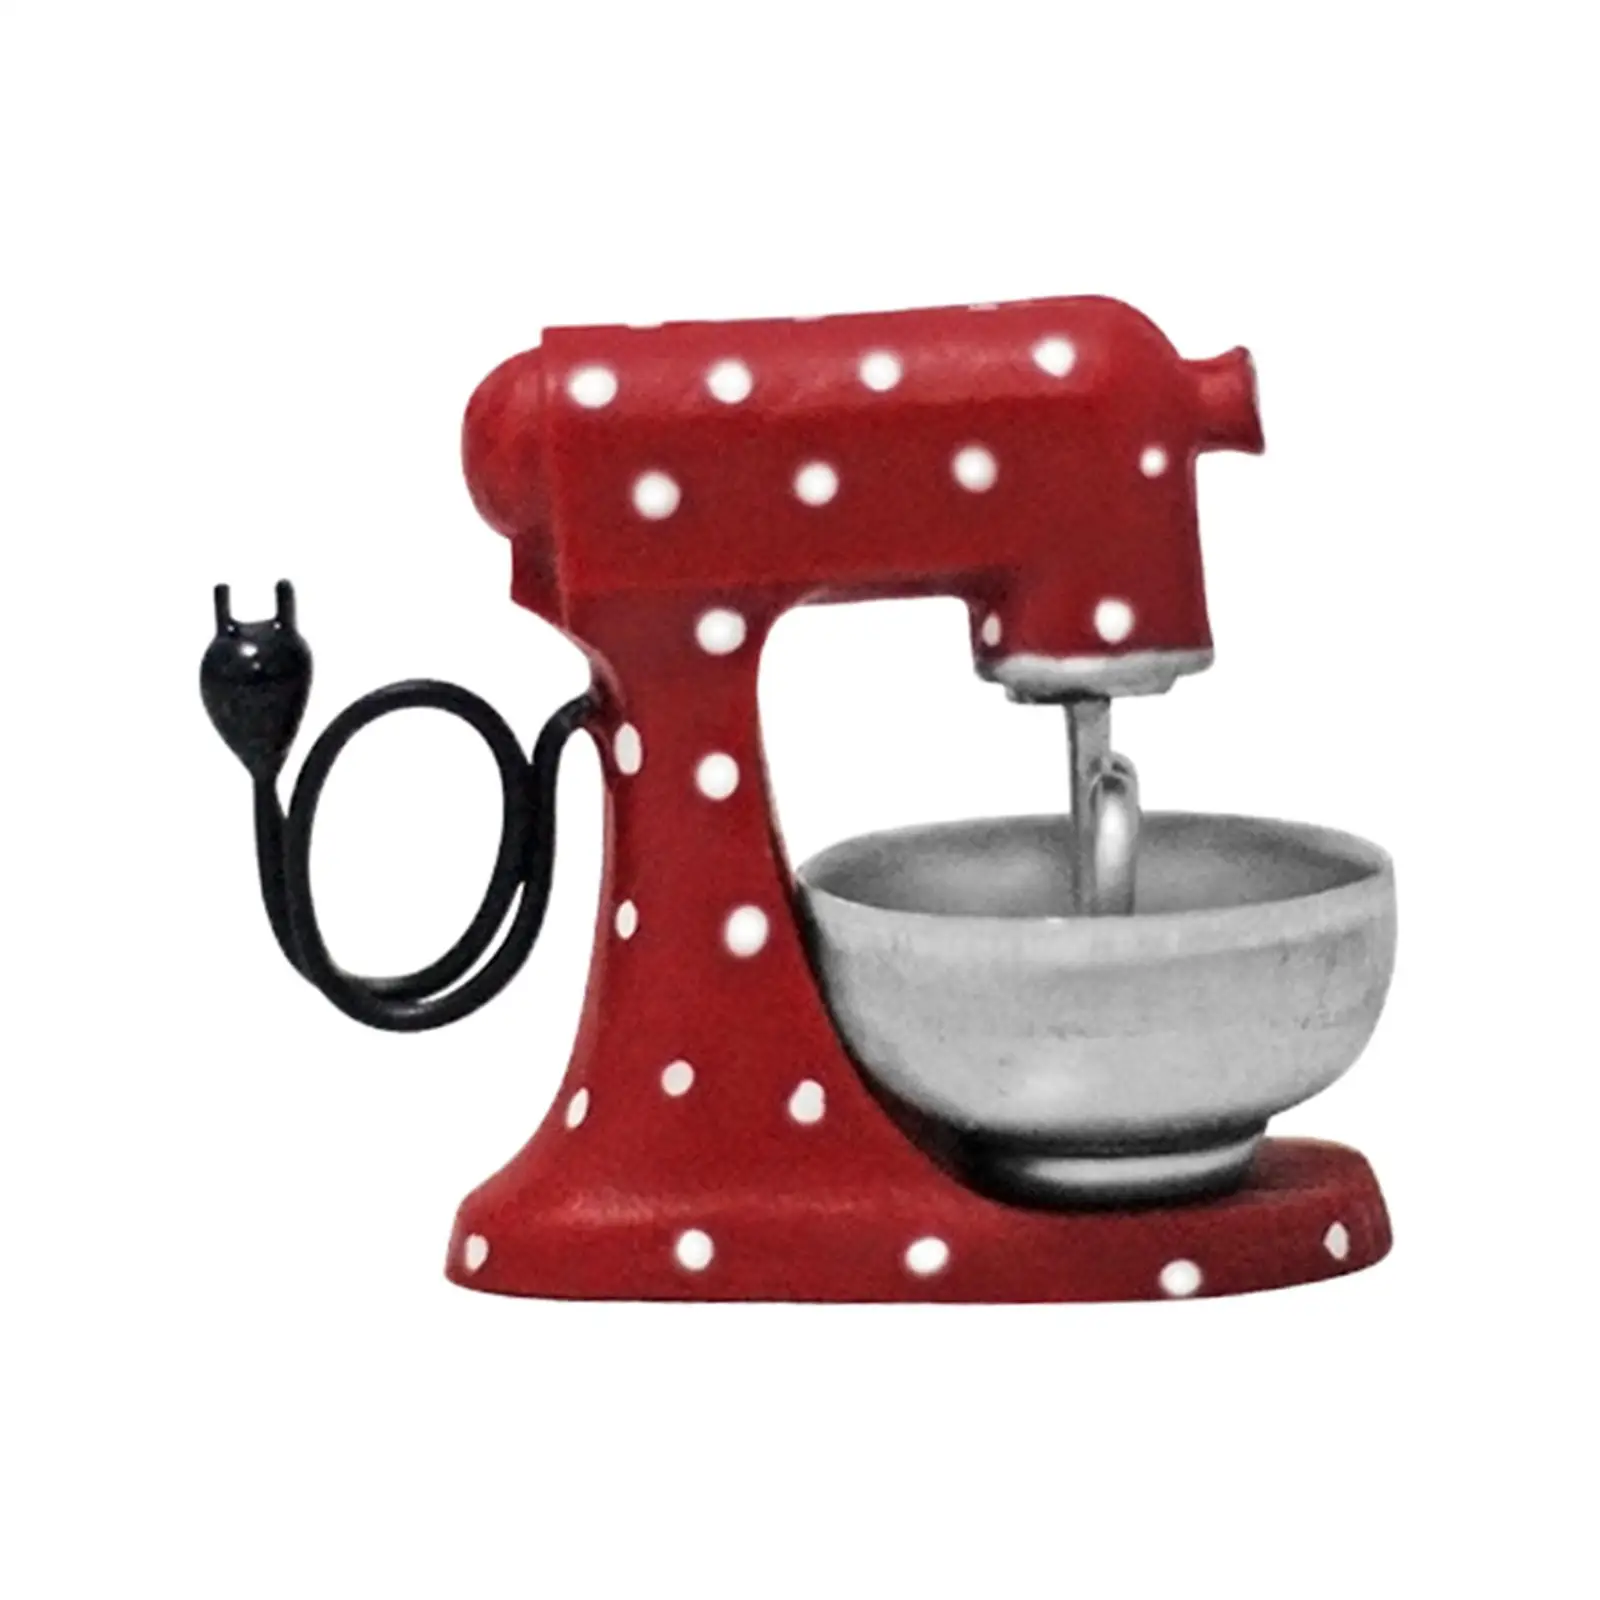 Mini Mixer Machine Dollhouse Handcraft Decoration Vintage Style Model Modern Resin 1:12 Scale for Tabletop Cooker Pretend Play